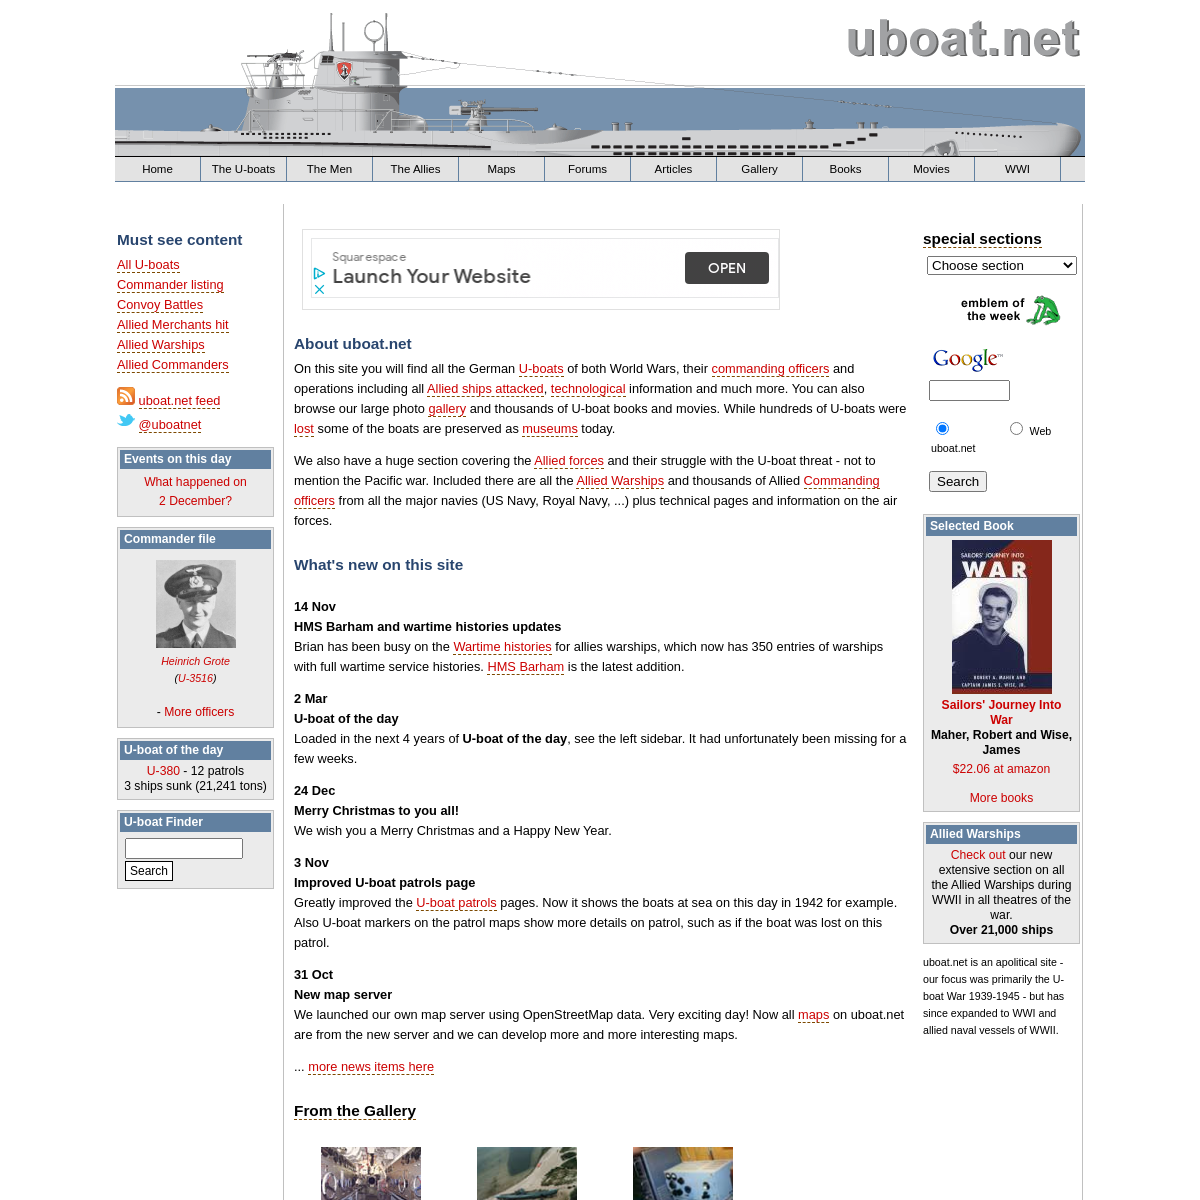 A complete backup of uboat.net